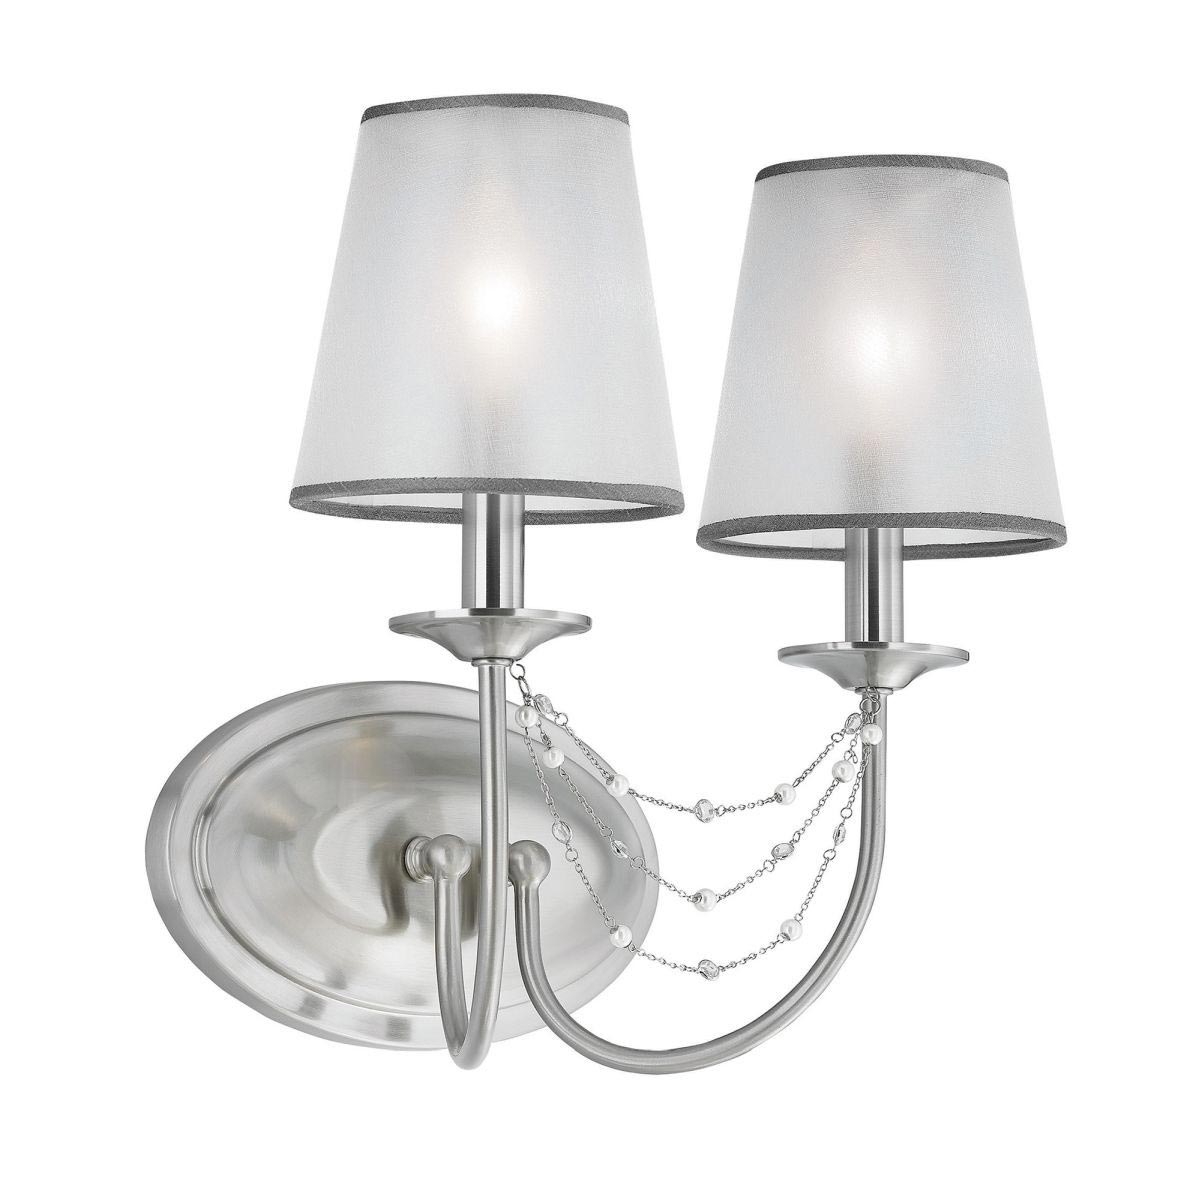 Feiss Aveline Brushed Steel Twin Wall Light With Organza Shades